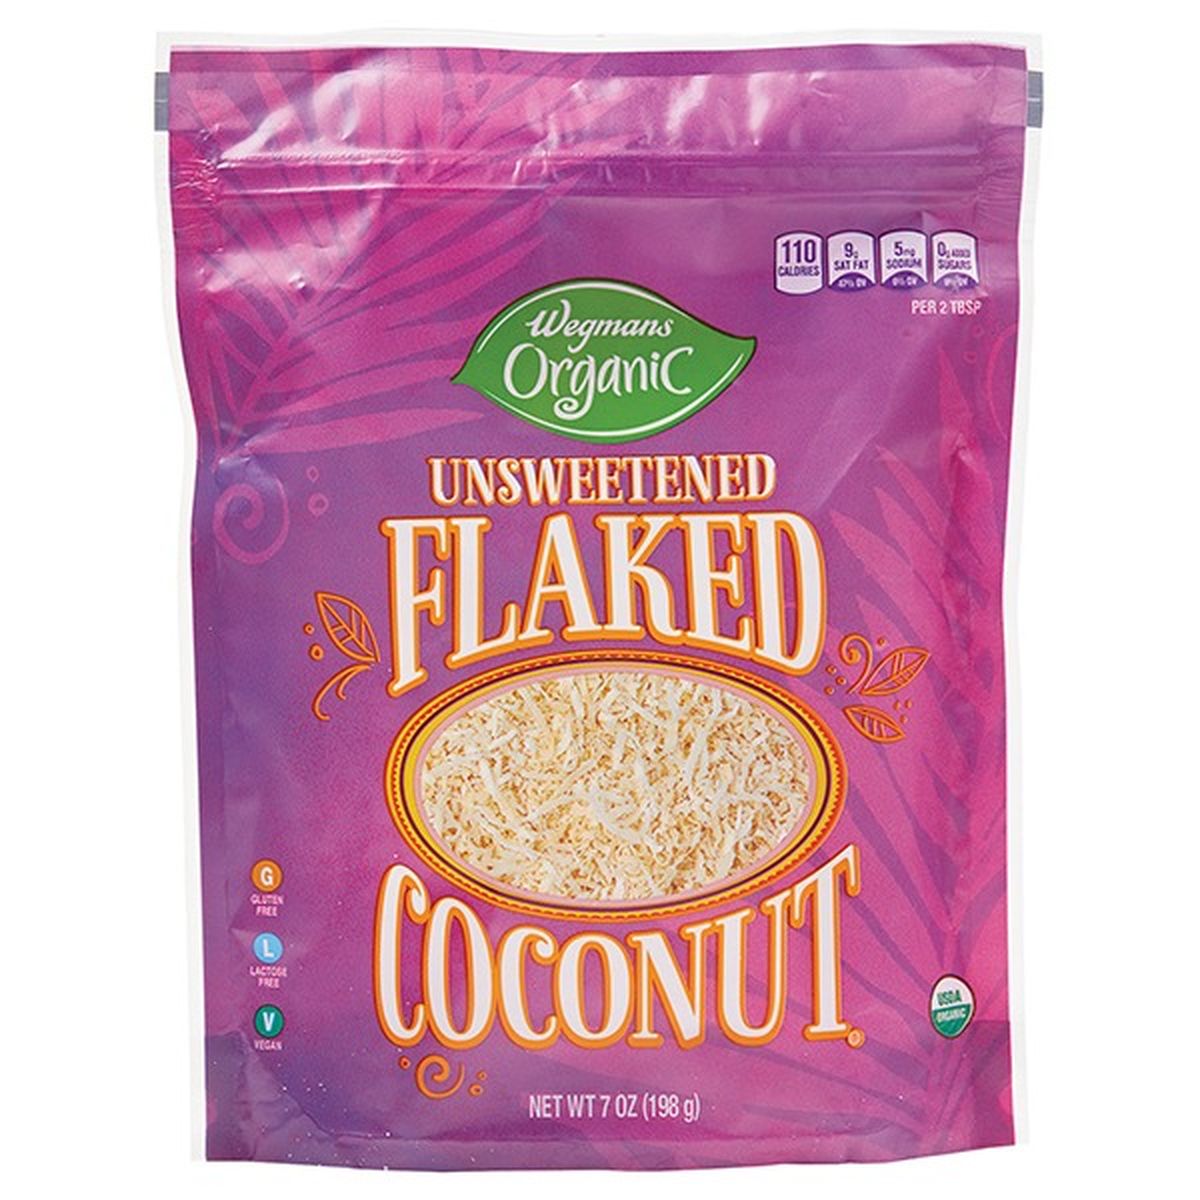 Calories in Wegmans Organic Coconut, Unsweetened, Flaked